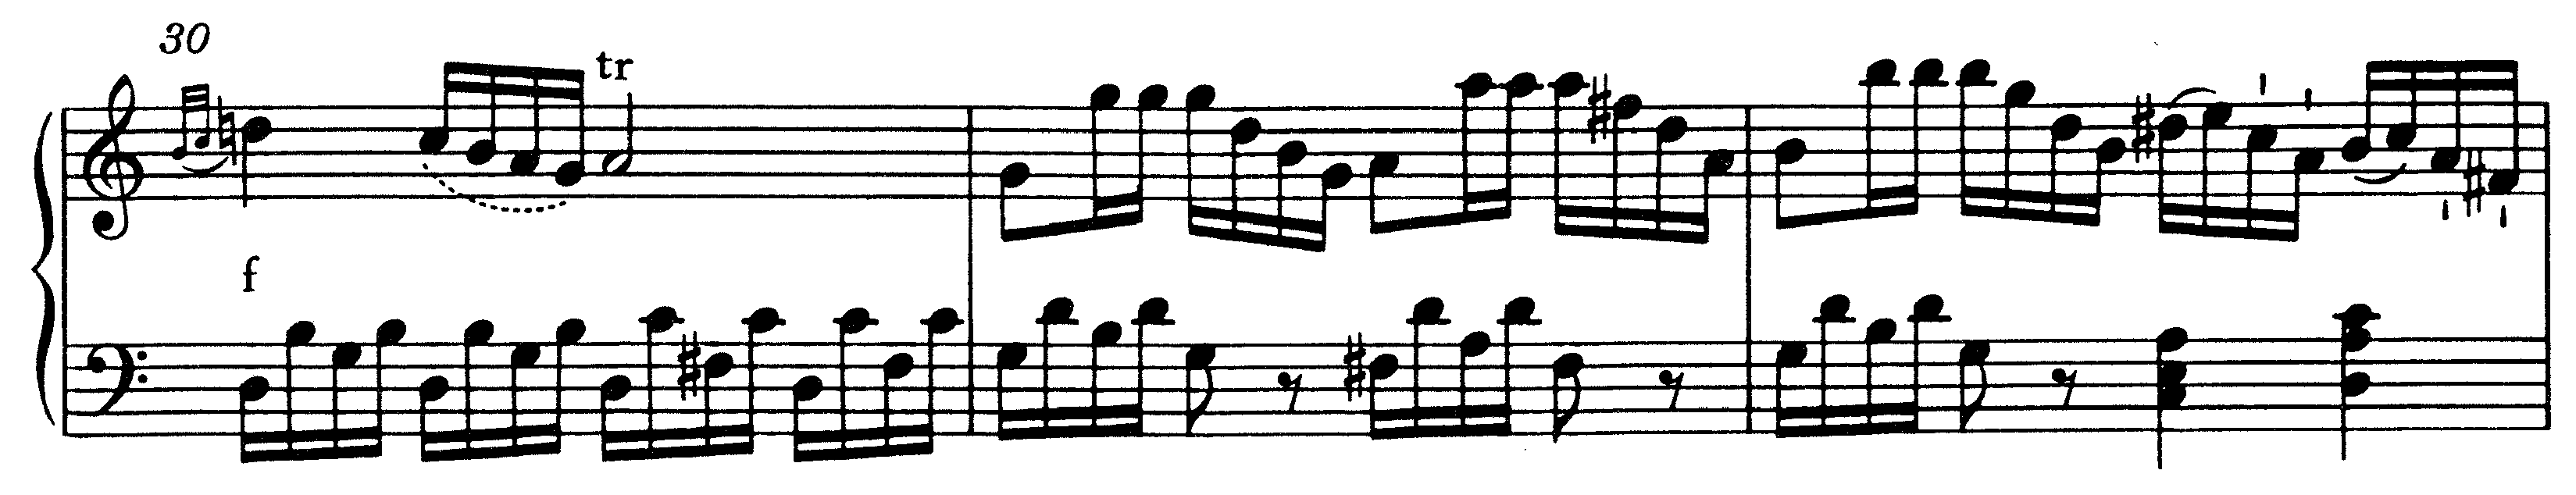 Staves with a treble and bass clef. More description below.